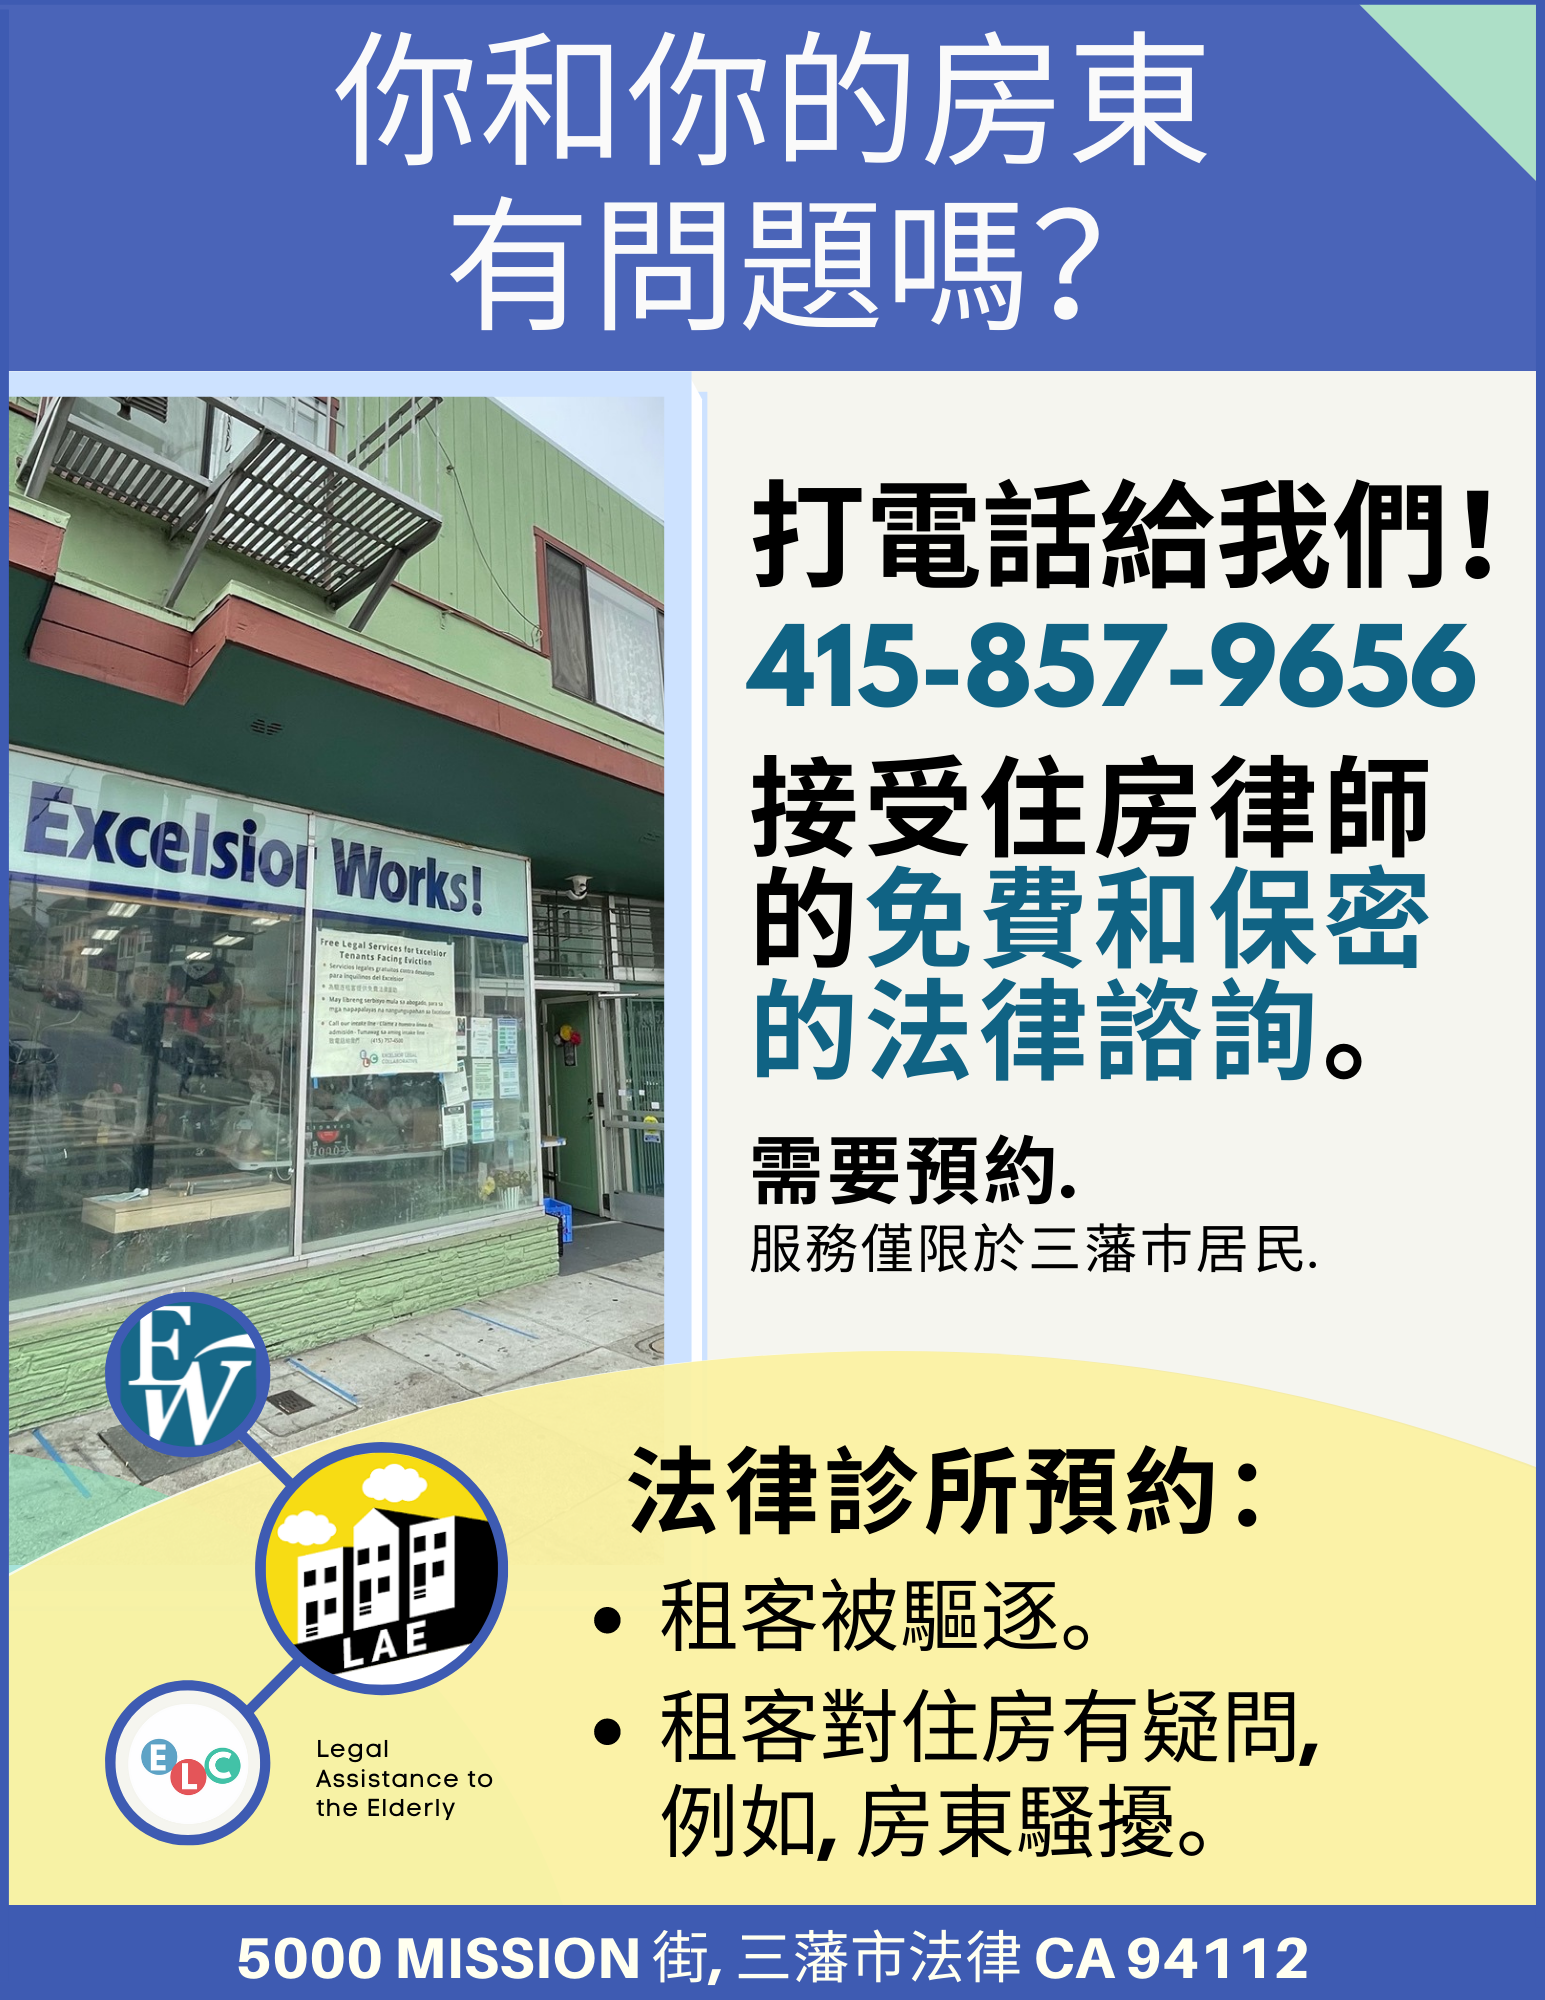 ENGCH LAE CLINIC FLYERS.png